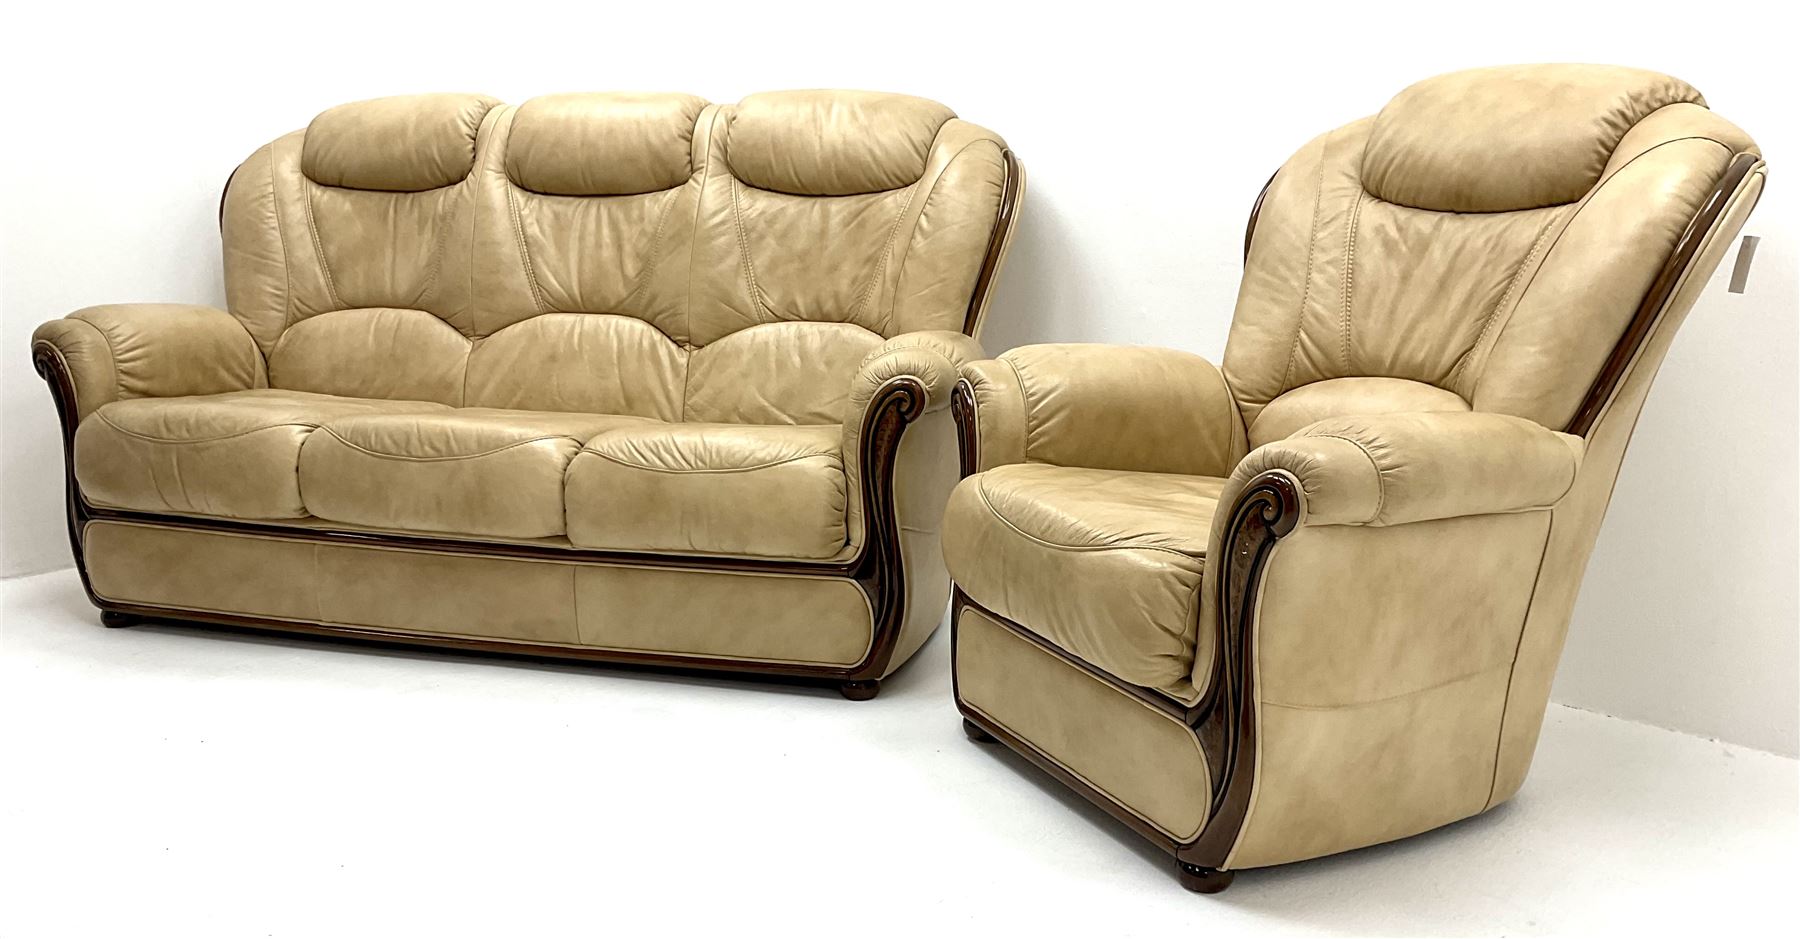 Three seat sofa upholstered in a cream leather (W178cm) and matching armchair (W85cm) - Image 3 of 3